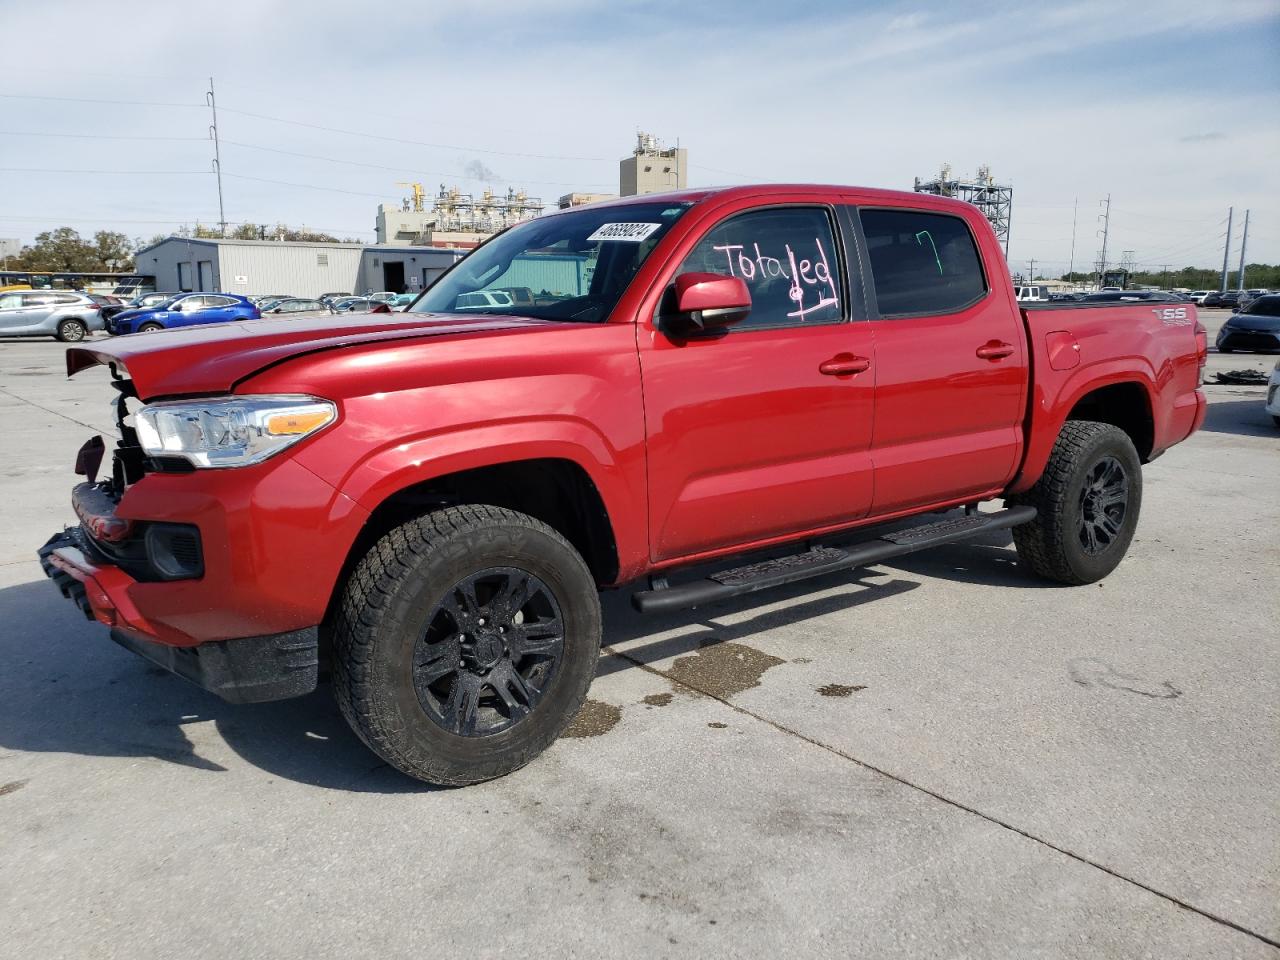 vin: 5TFAX5GN7MX190438 5TFAX5GN7MX190438 2021 toyota tacoma 2700 for Sale in 70129 2348, La - New Orleans, New Orleans, USA